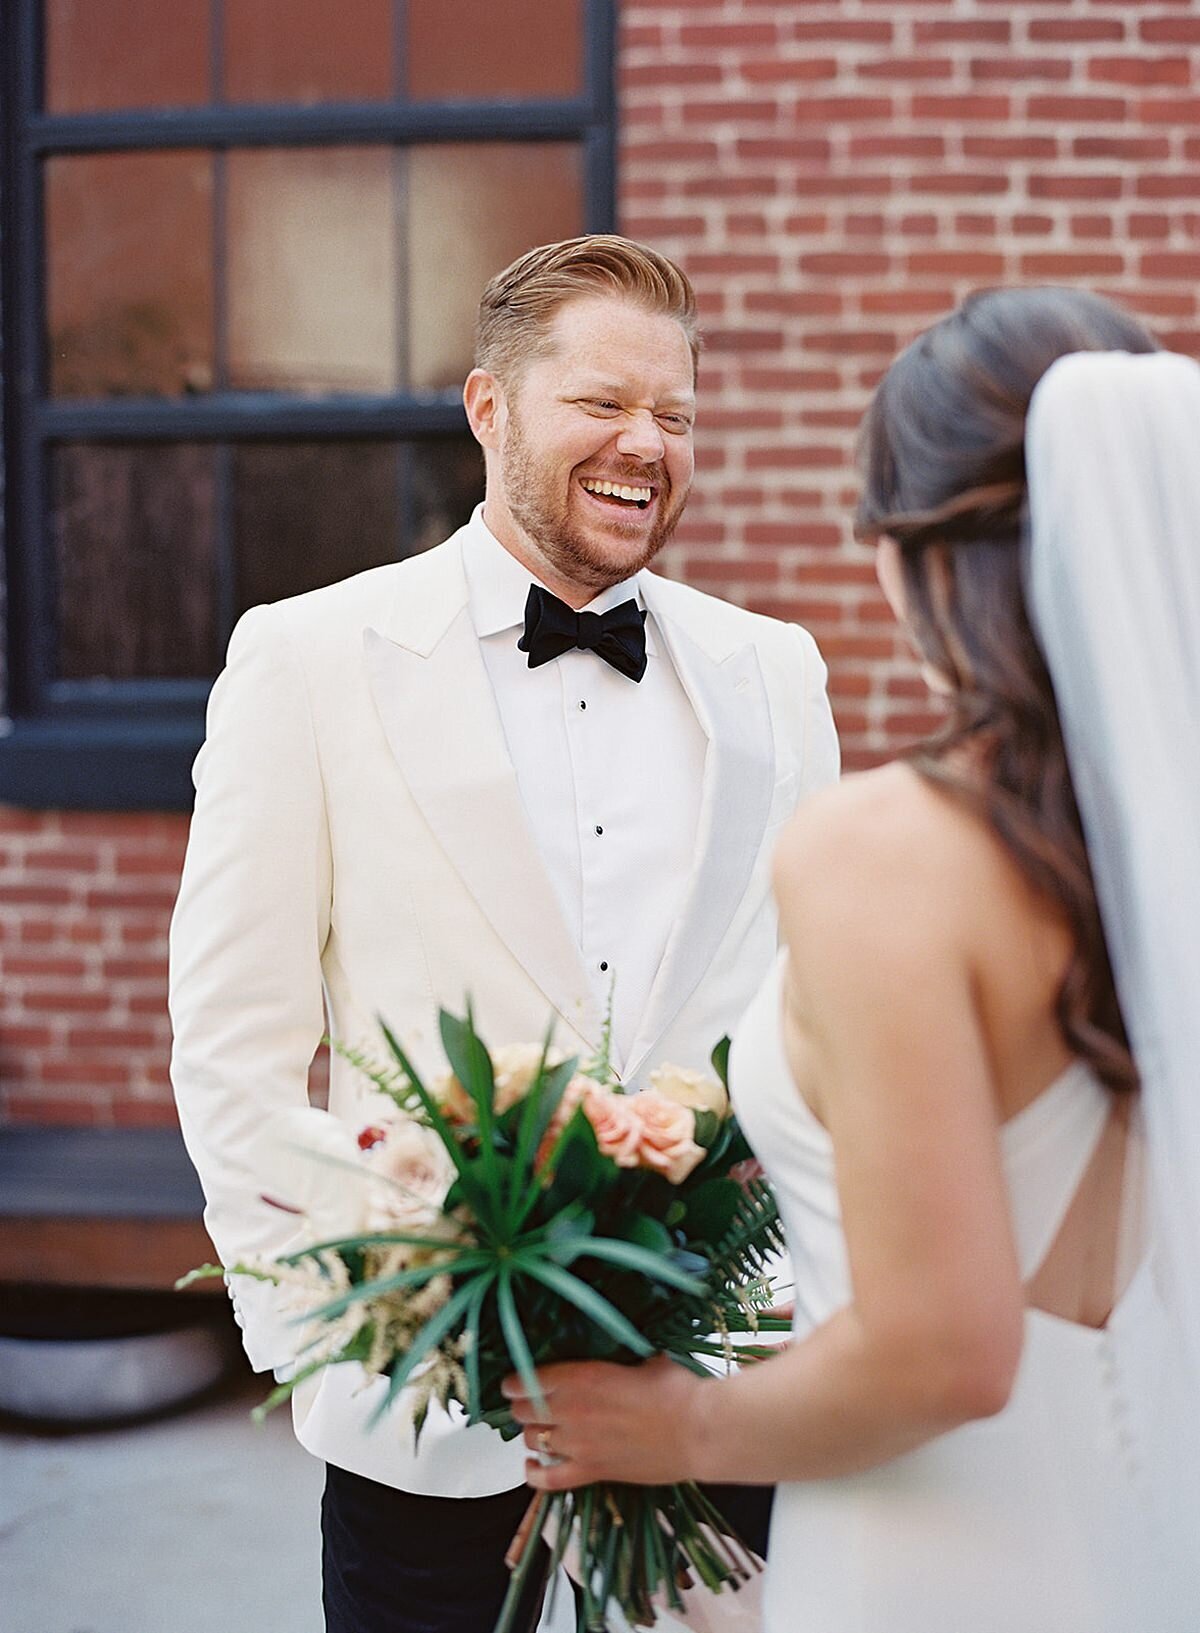 The groom, wearing a tuxedo with a white jacket laughs at something the bride, wearing a white silk halter top sheath wedding dress and veil, says to him. The bride holds her tropical bouquet of palm fronds, pink, peach, yellow, white and ivory flowers and she laughs with the groom.